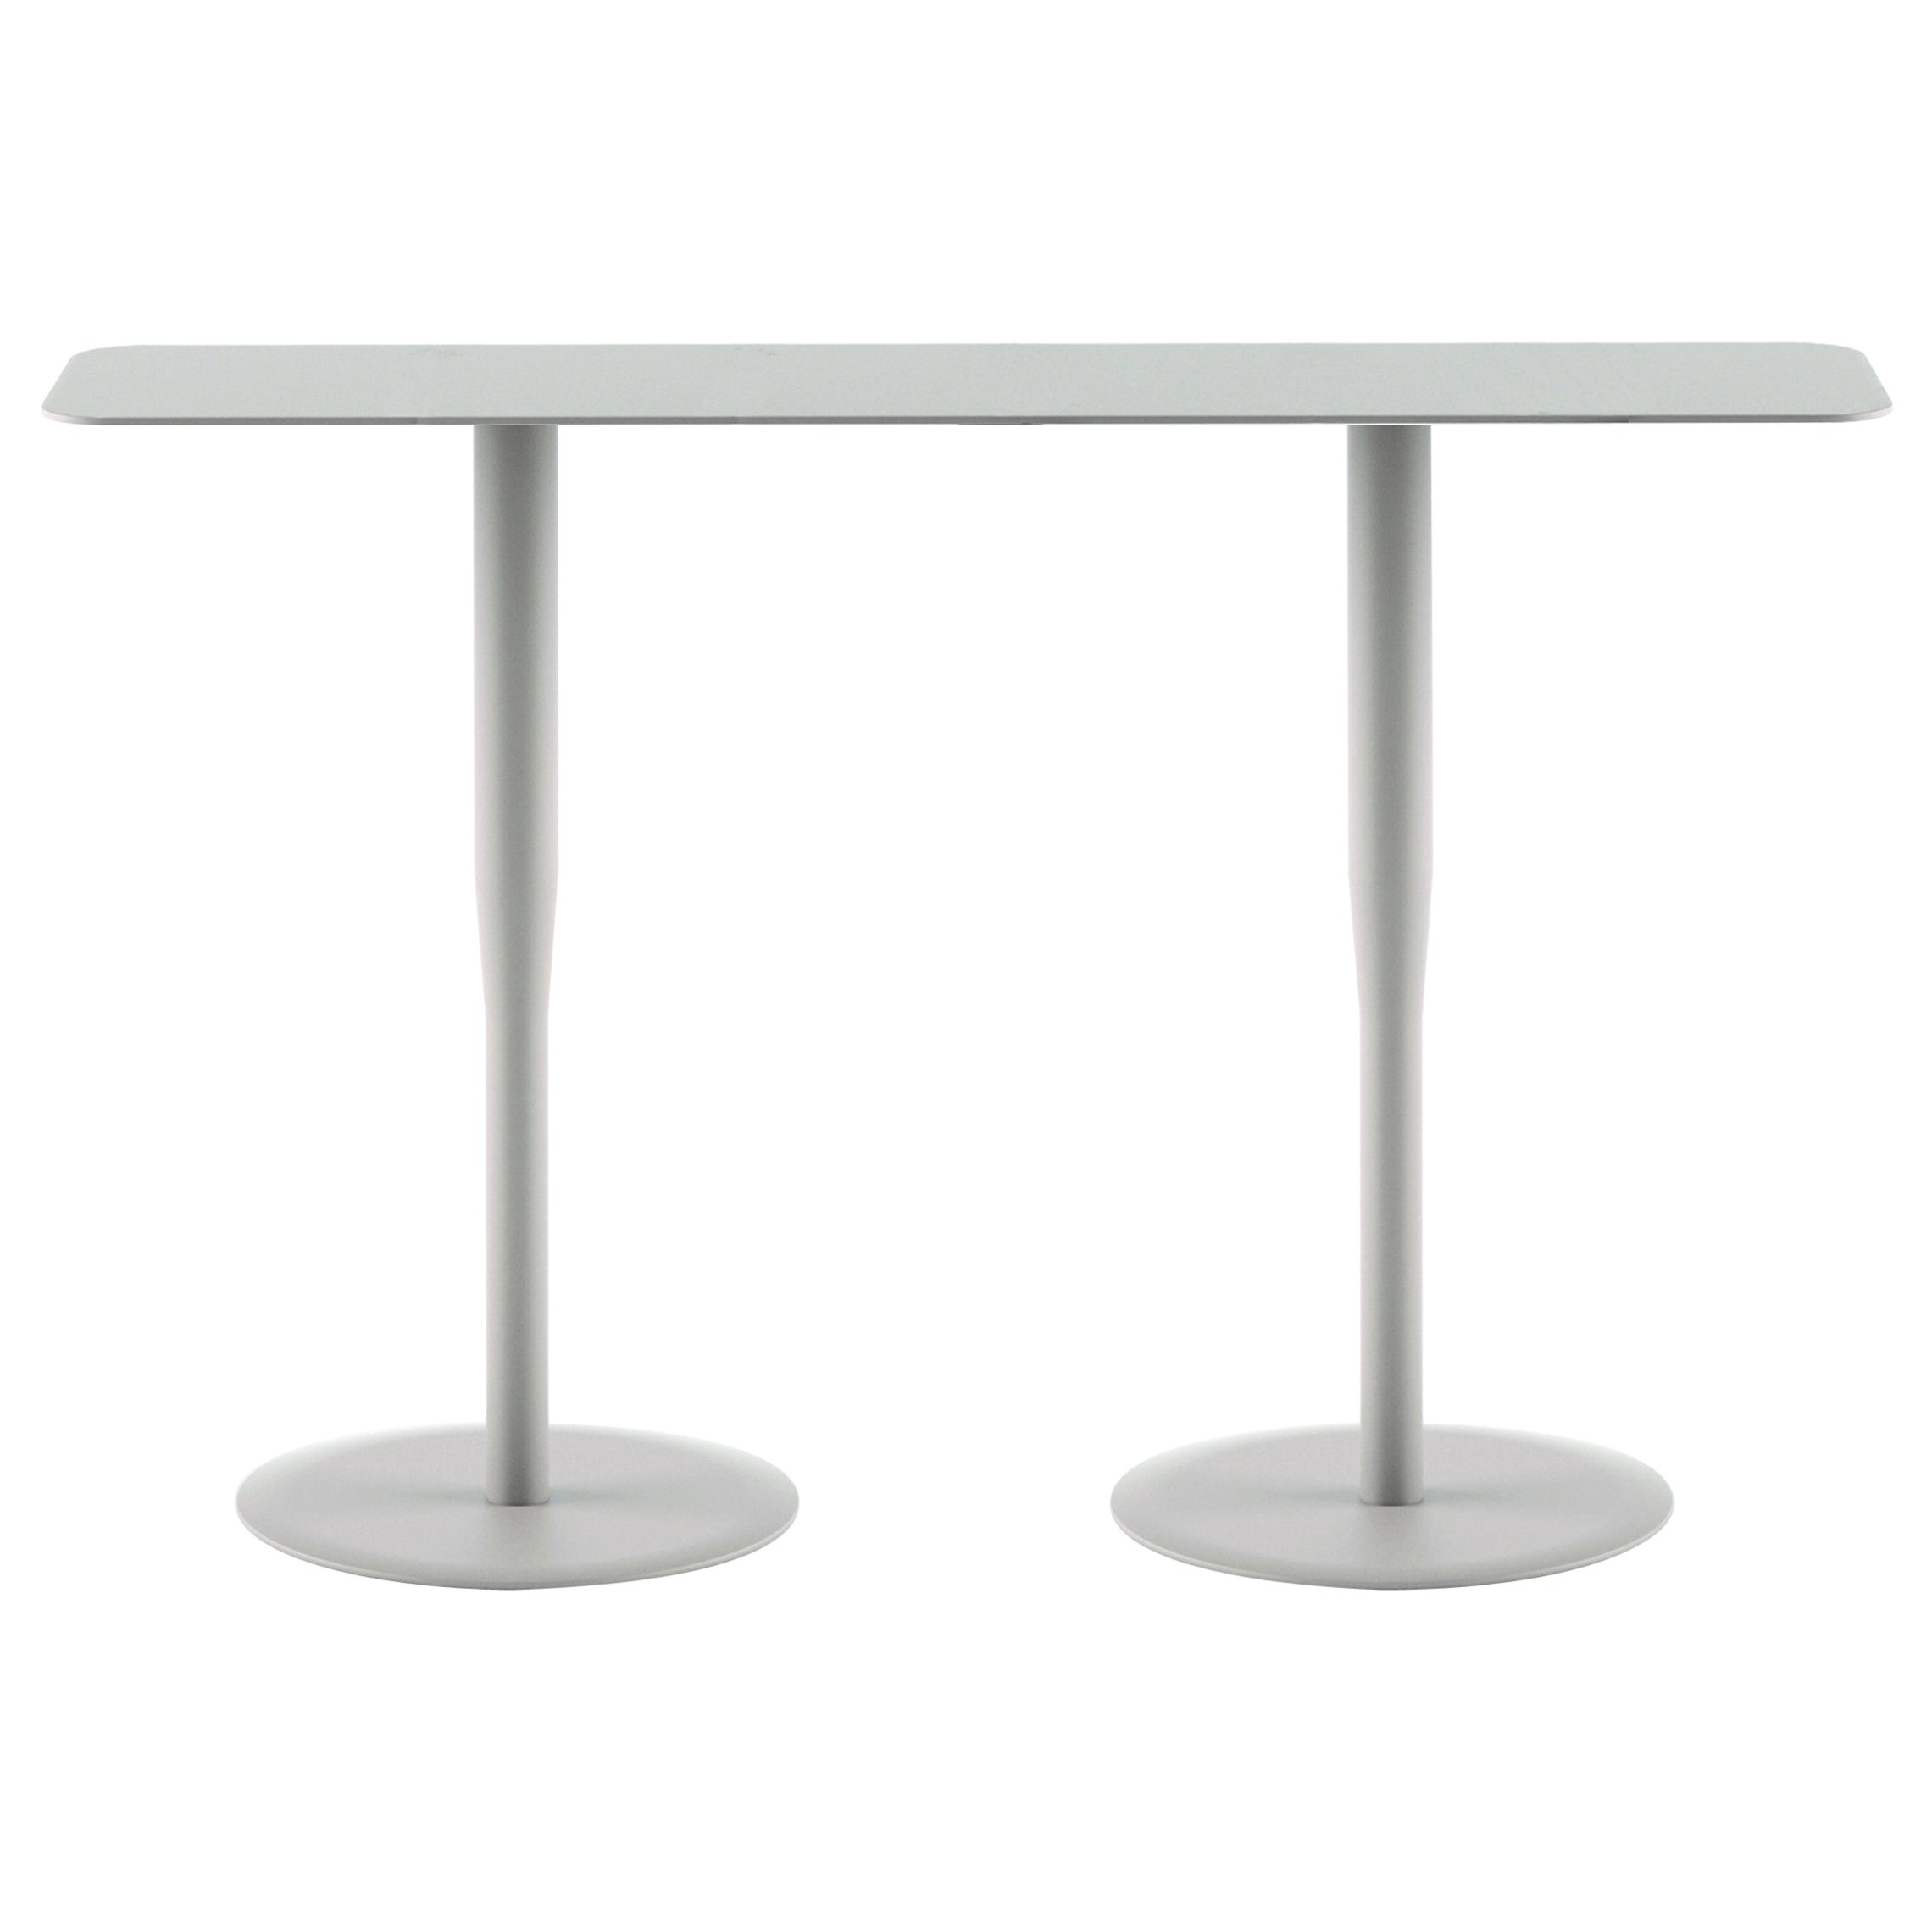 Alias Atlas Small Base Table in Sand Top with Lacquered Aluminium Frame For Sale